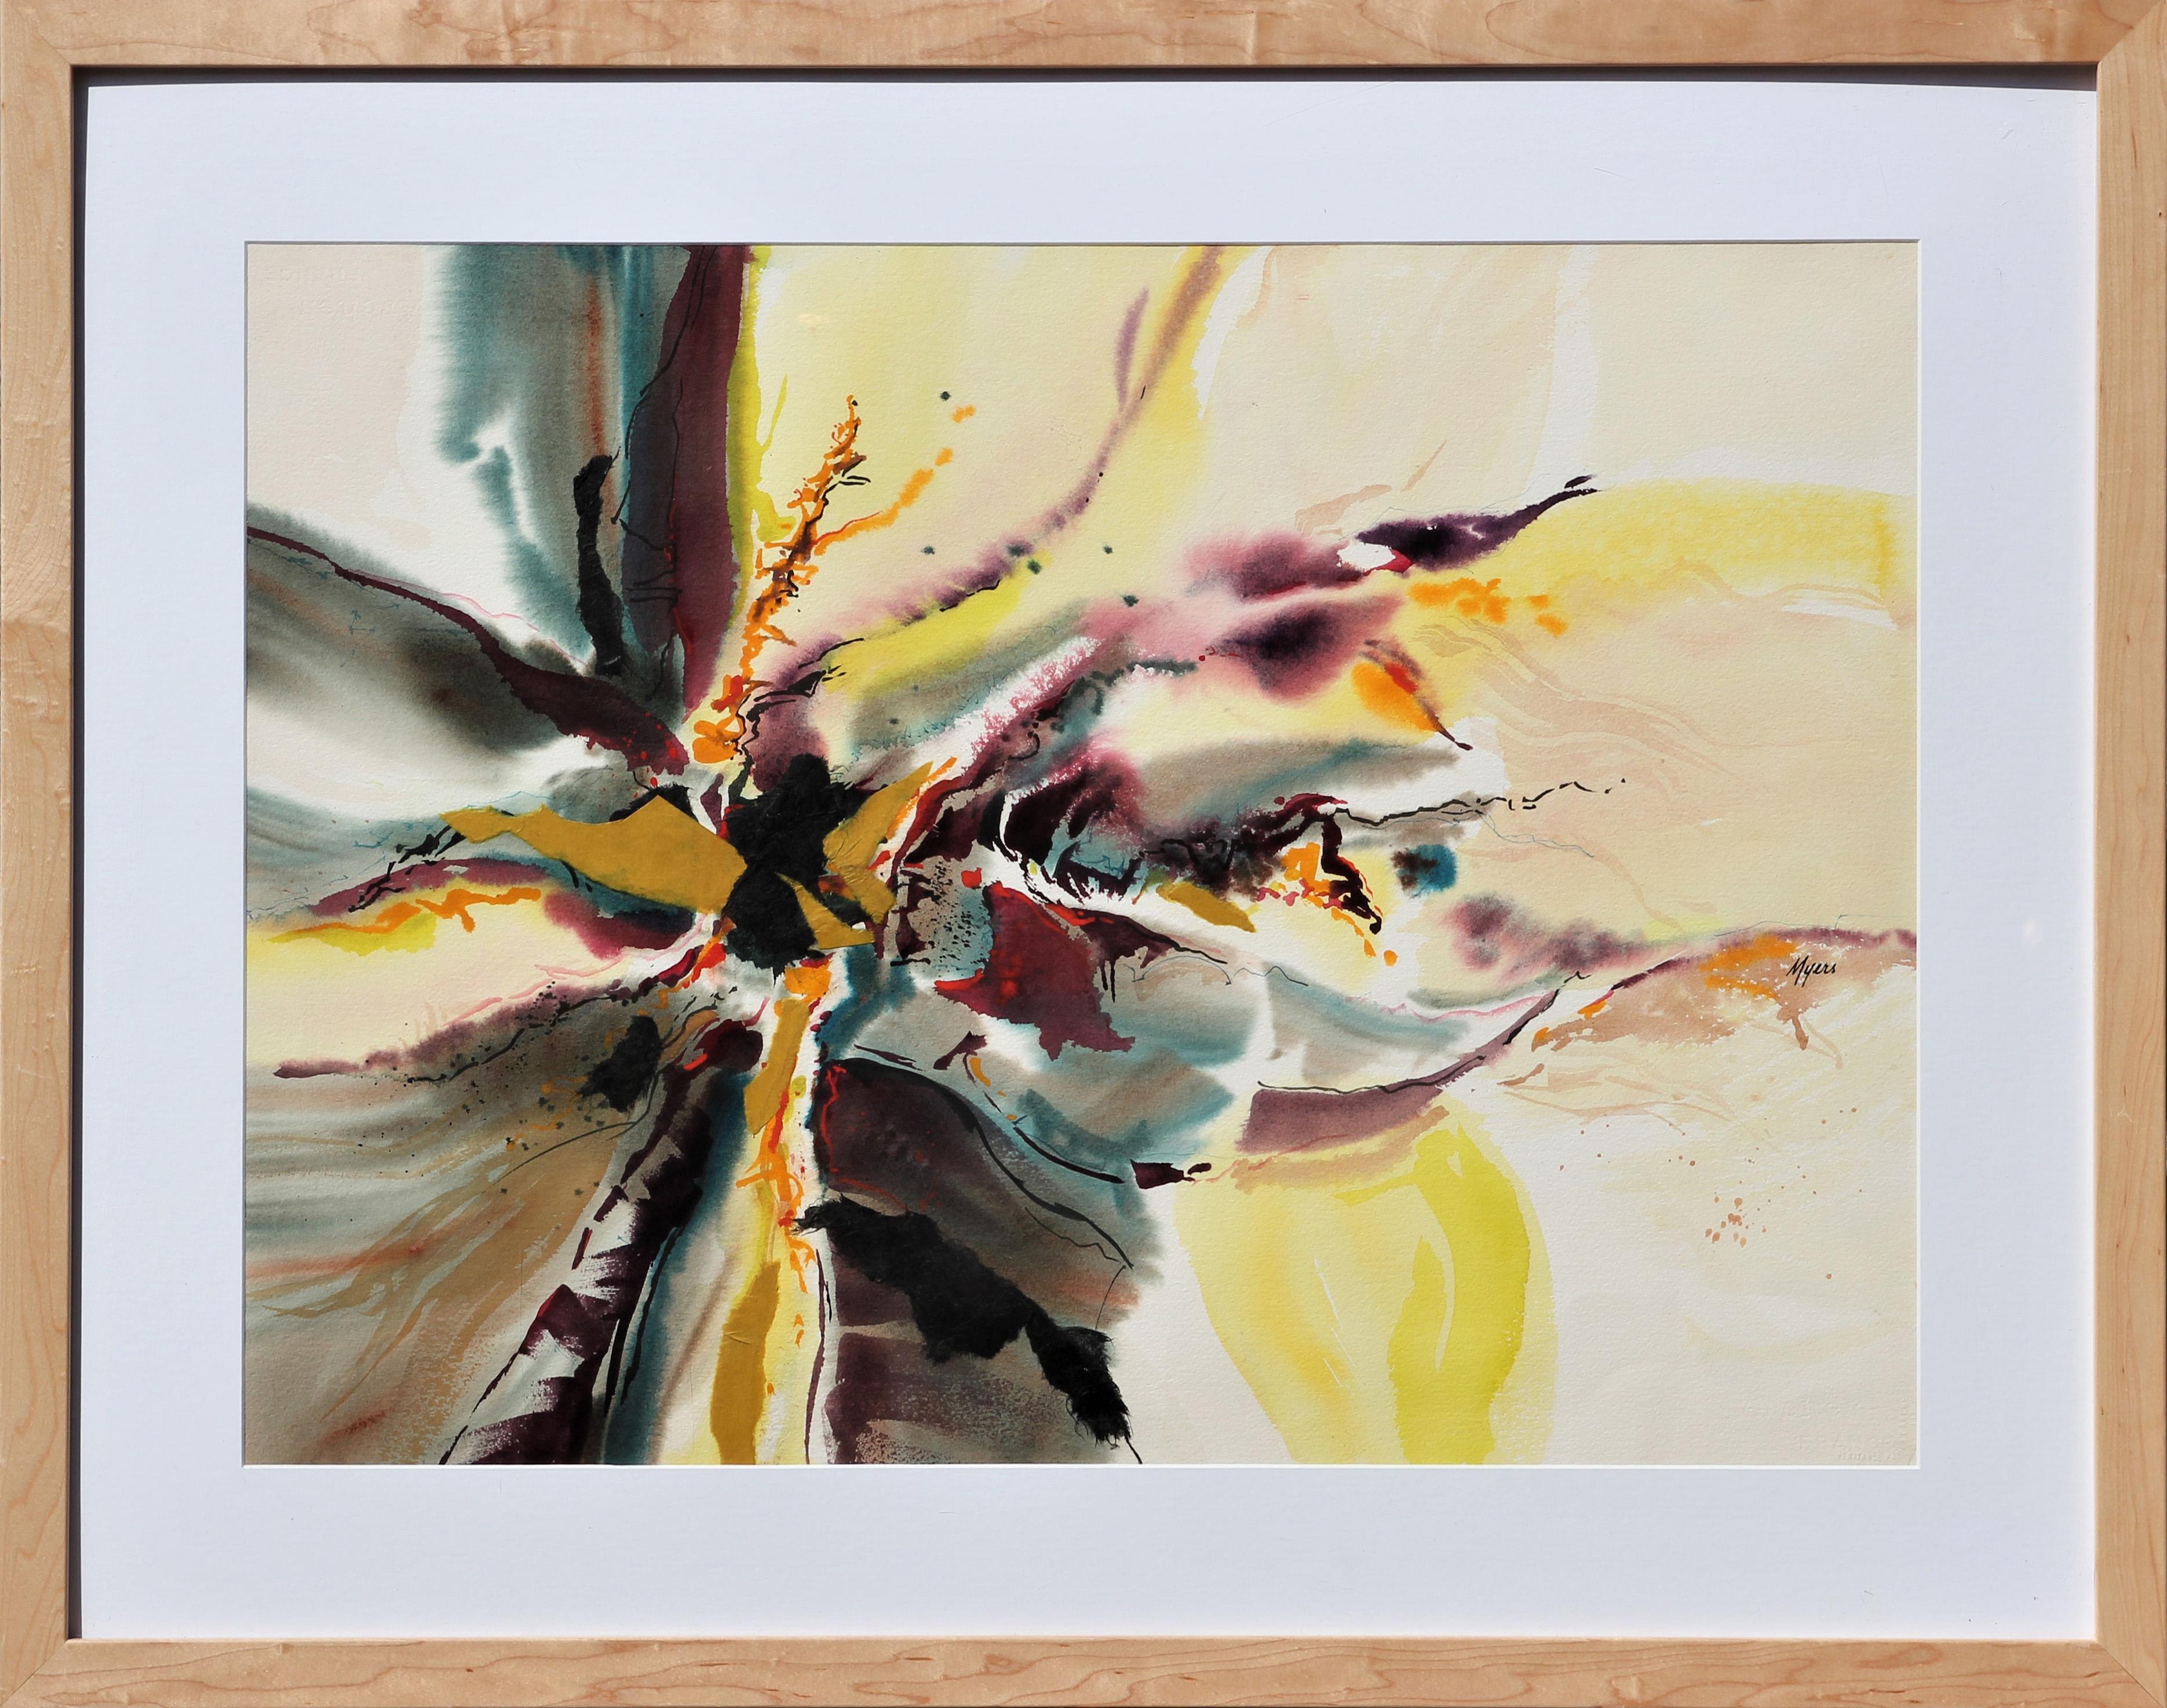 Carole Myers Abstract Drawing - "Floral IV" Modern Abstract Yellow, Teal, and Purple Floral Still Life Painting